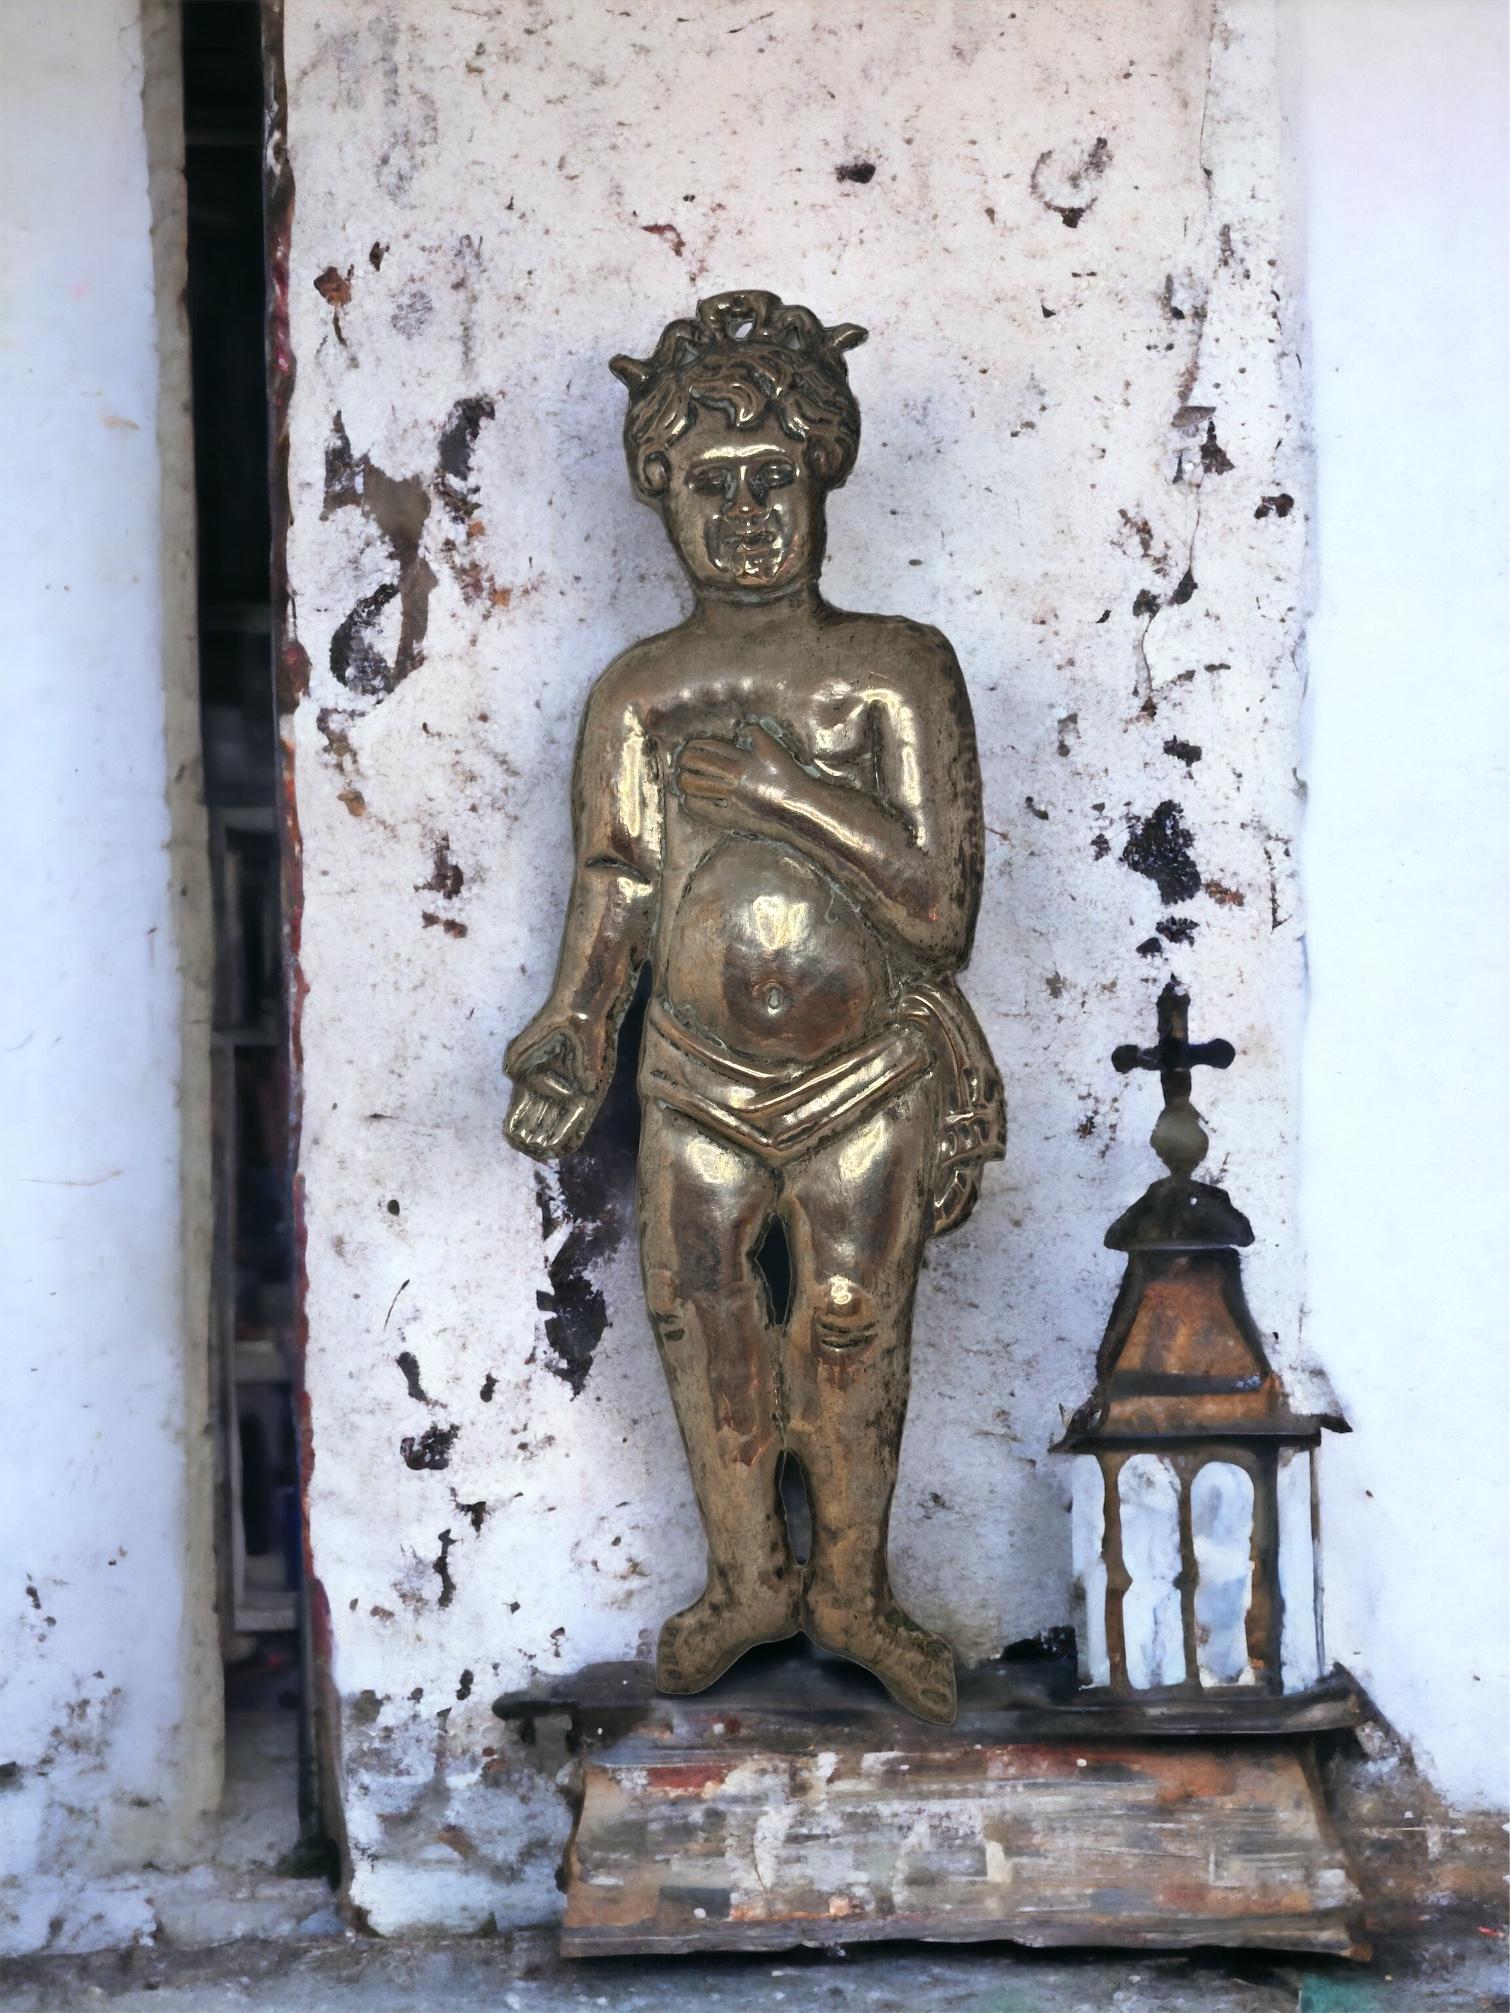 Antique and large ex voto in the shape of a male figure, in silver, from the 1890s to the 1900s, Italy.
Perfect vintage condition, there are no breakages or signs of repairs.
Beautiful face expression and a wonderful patina of time. 
At the top